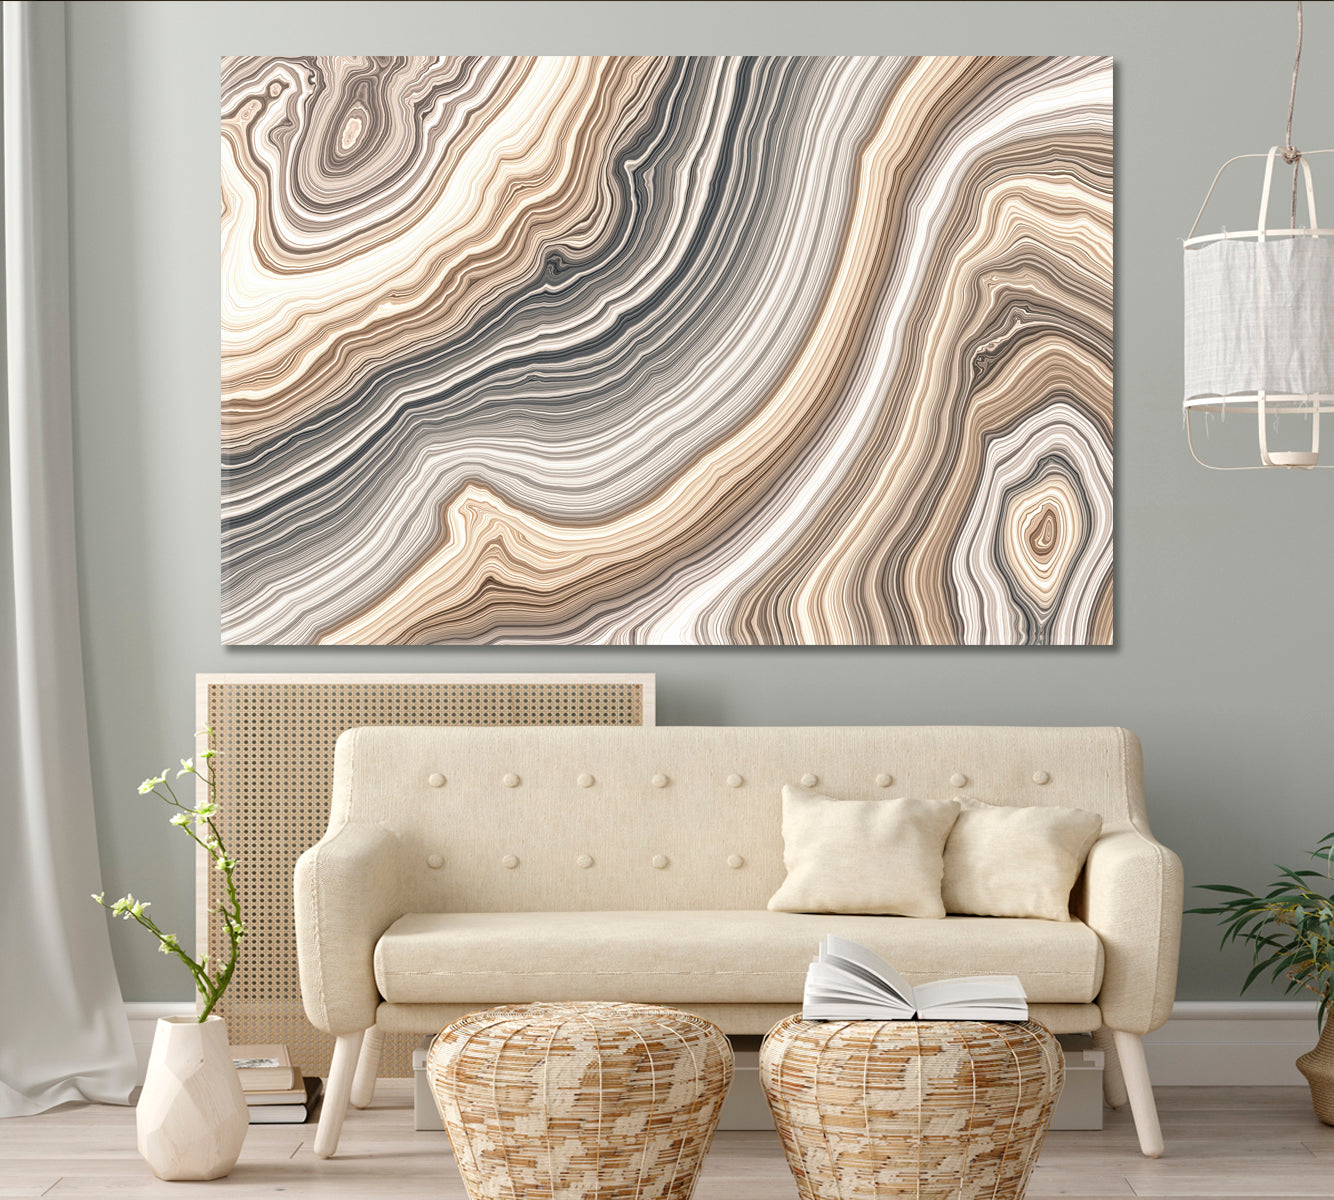 Beige Marble Pattern Curly Veins Abstract Soft Tones Abstract Art Print Artesty 1 panel 24" x 16" 